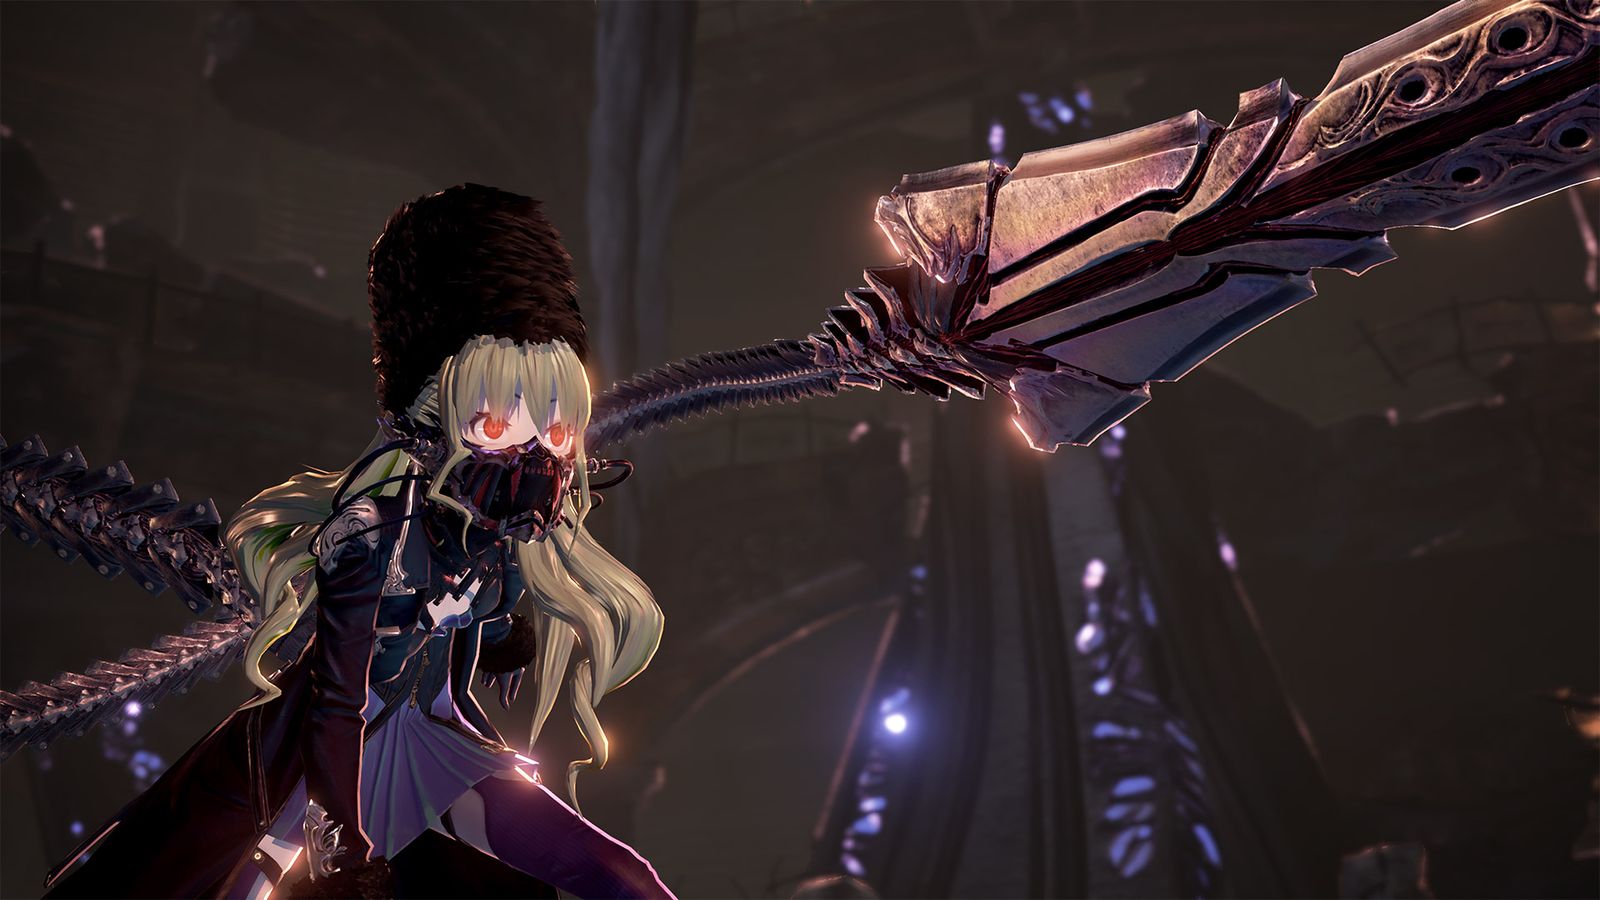 Code Vein wears its influences on its sleeve, but it’s adding its own wrinkles to the popular Souls-like formula